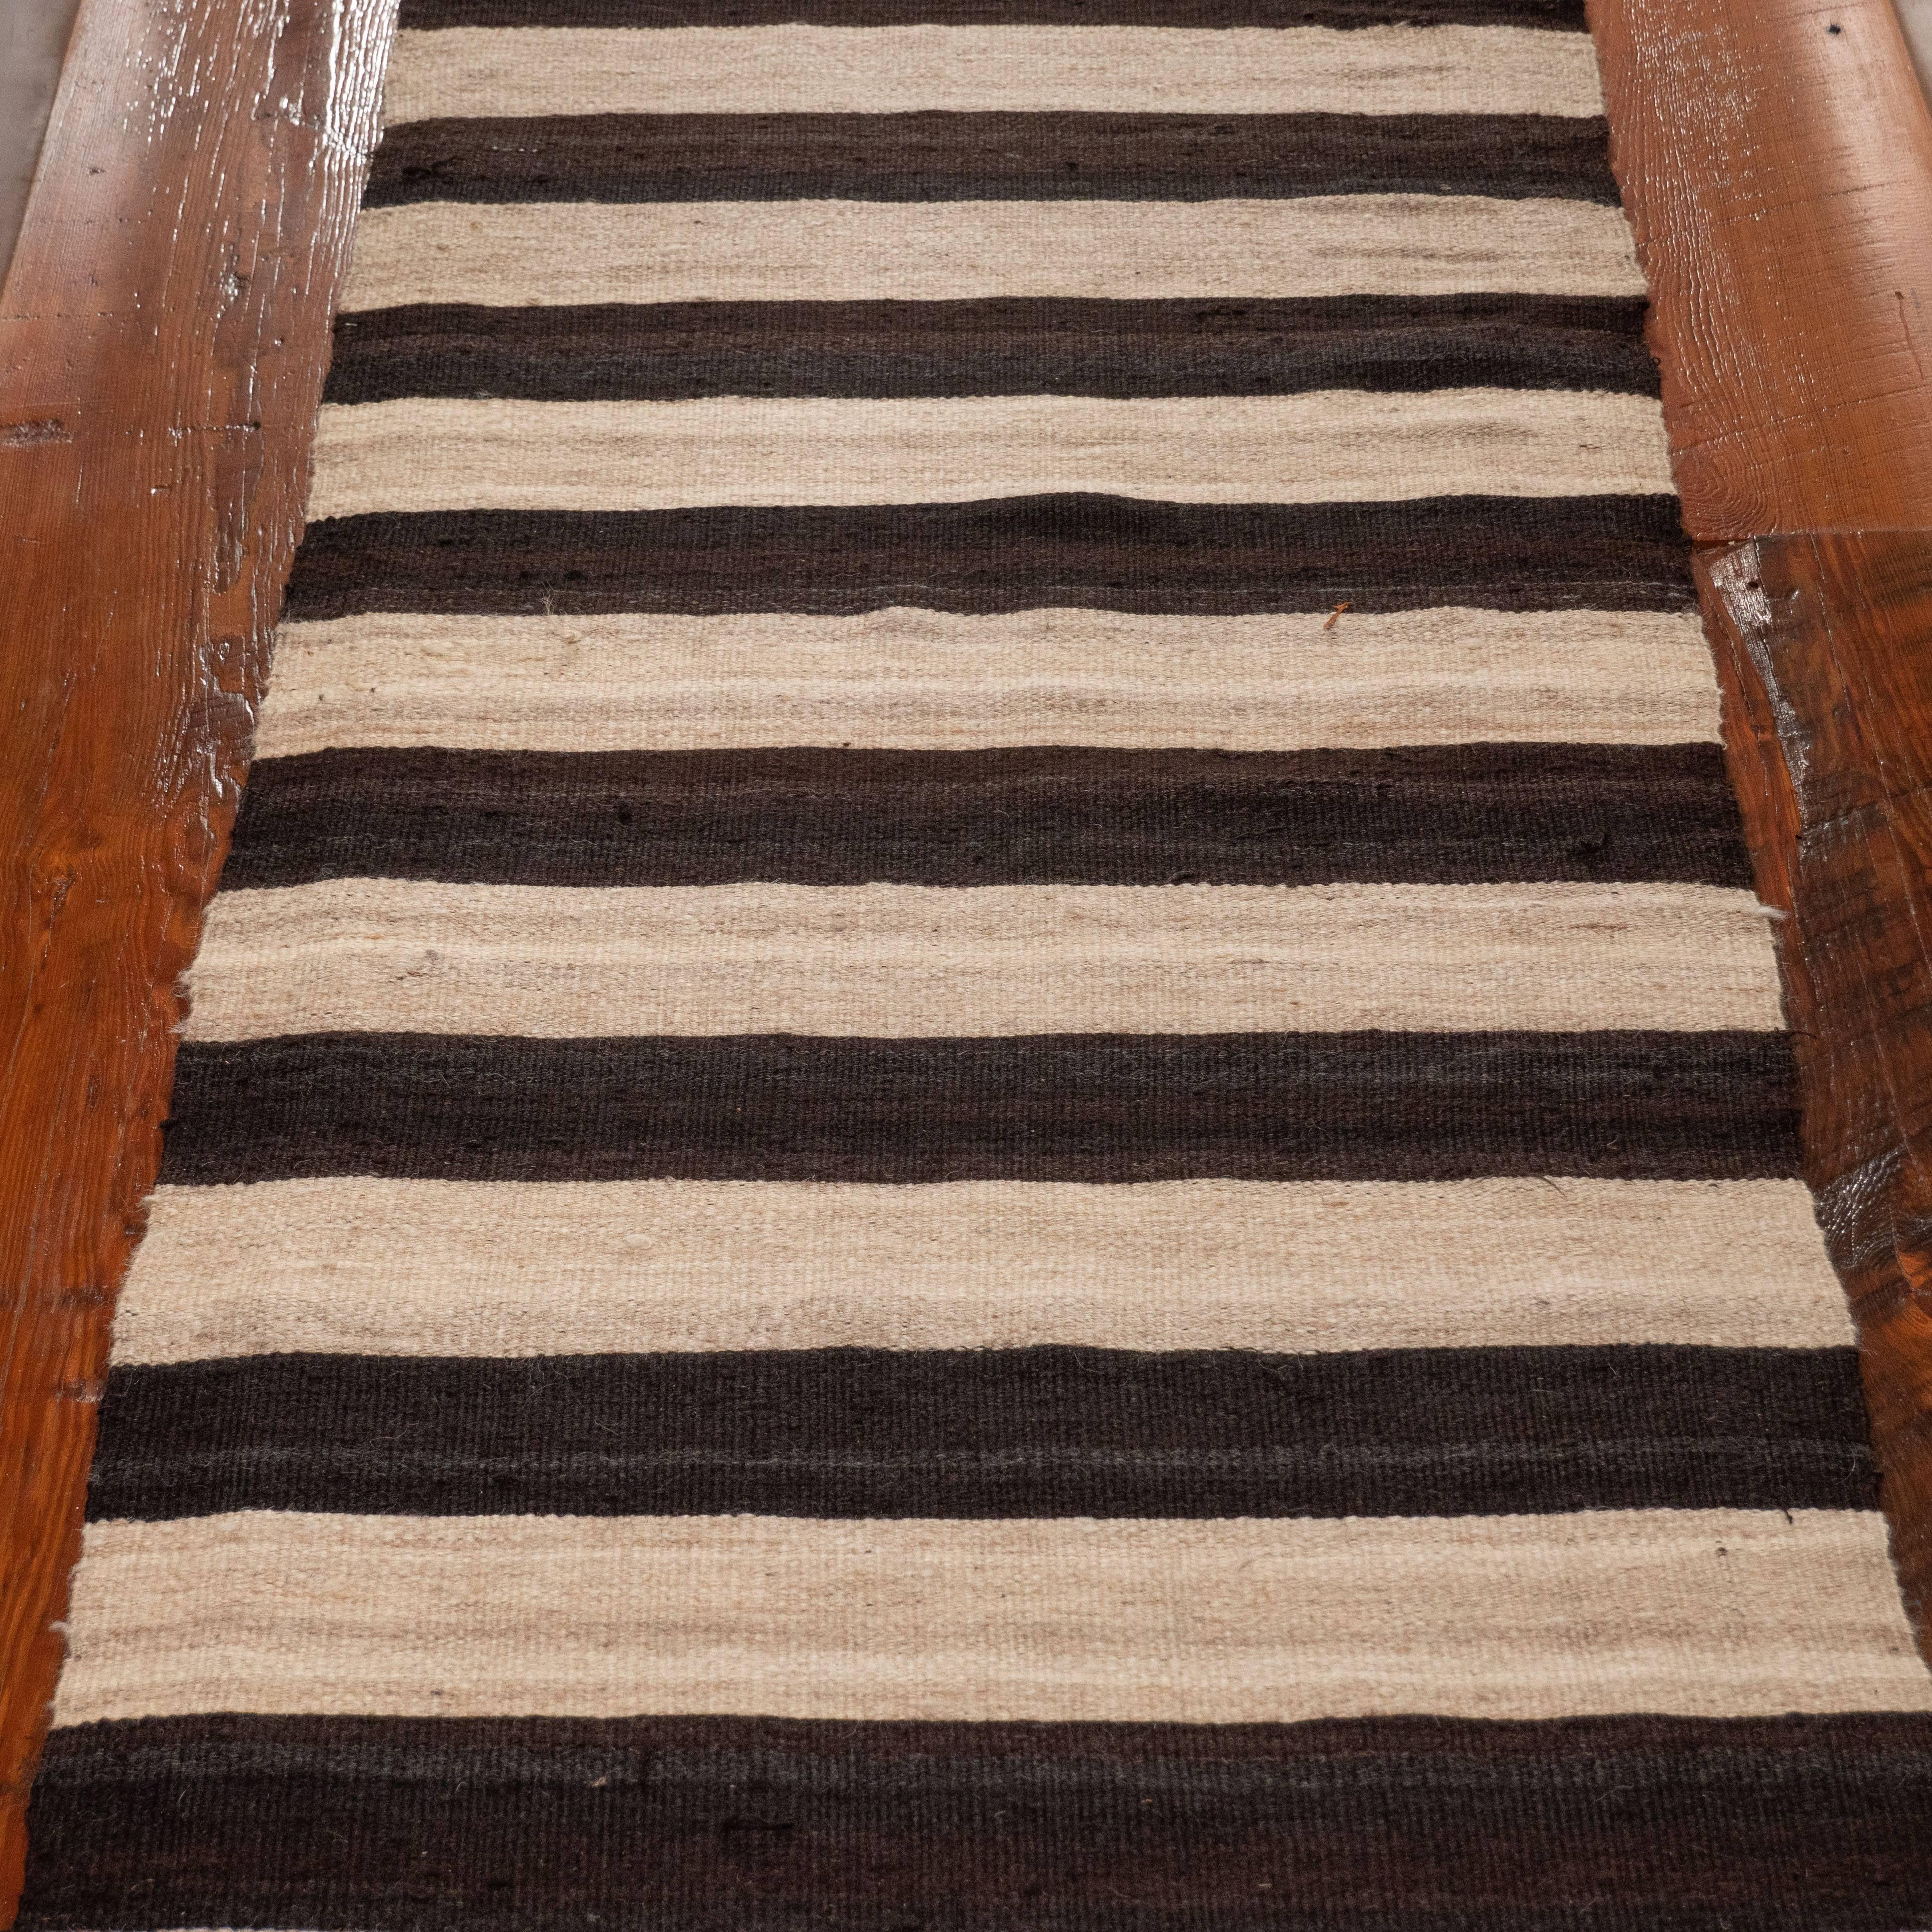 Persian Kilim Hand-Knotted Black and White Runner